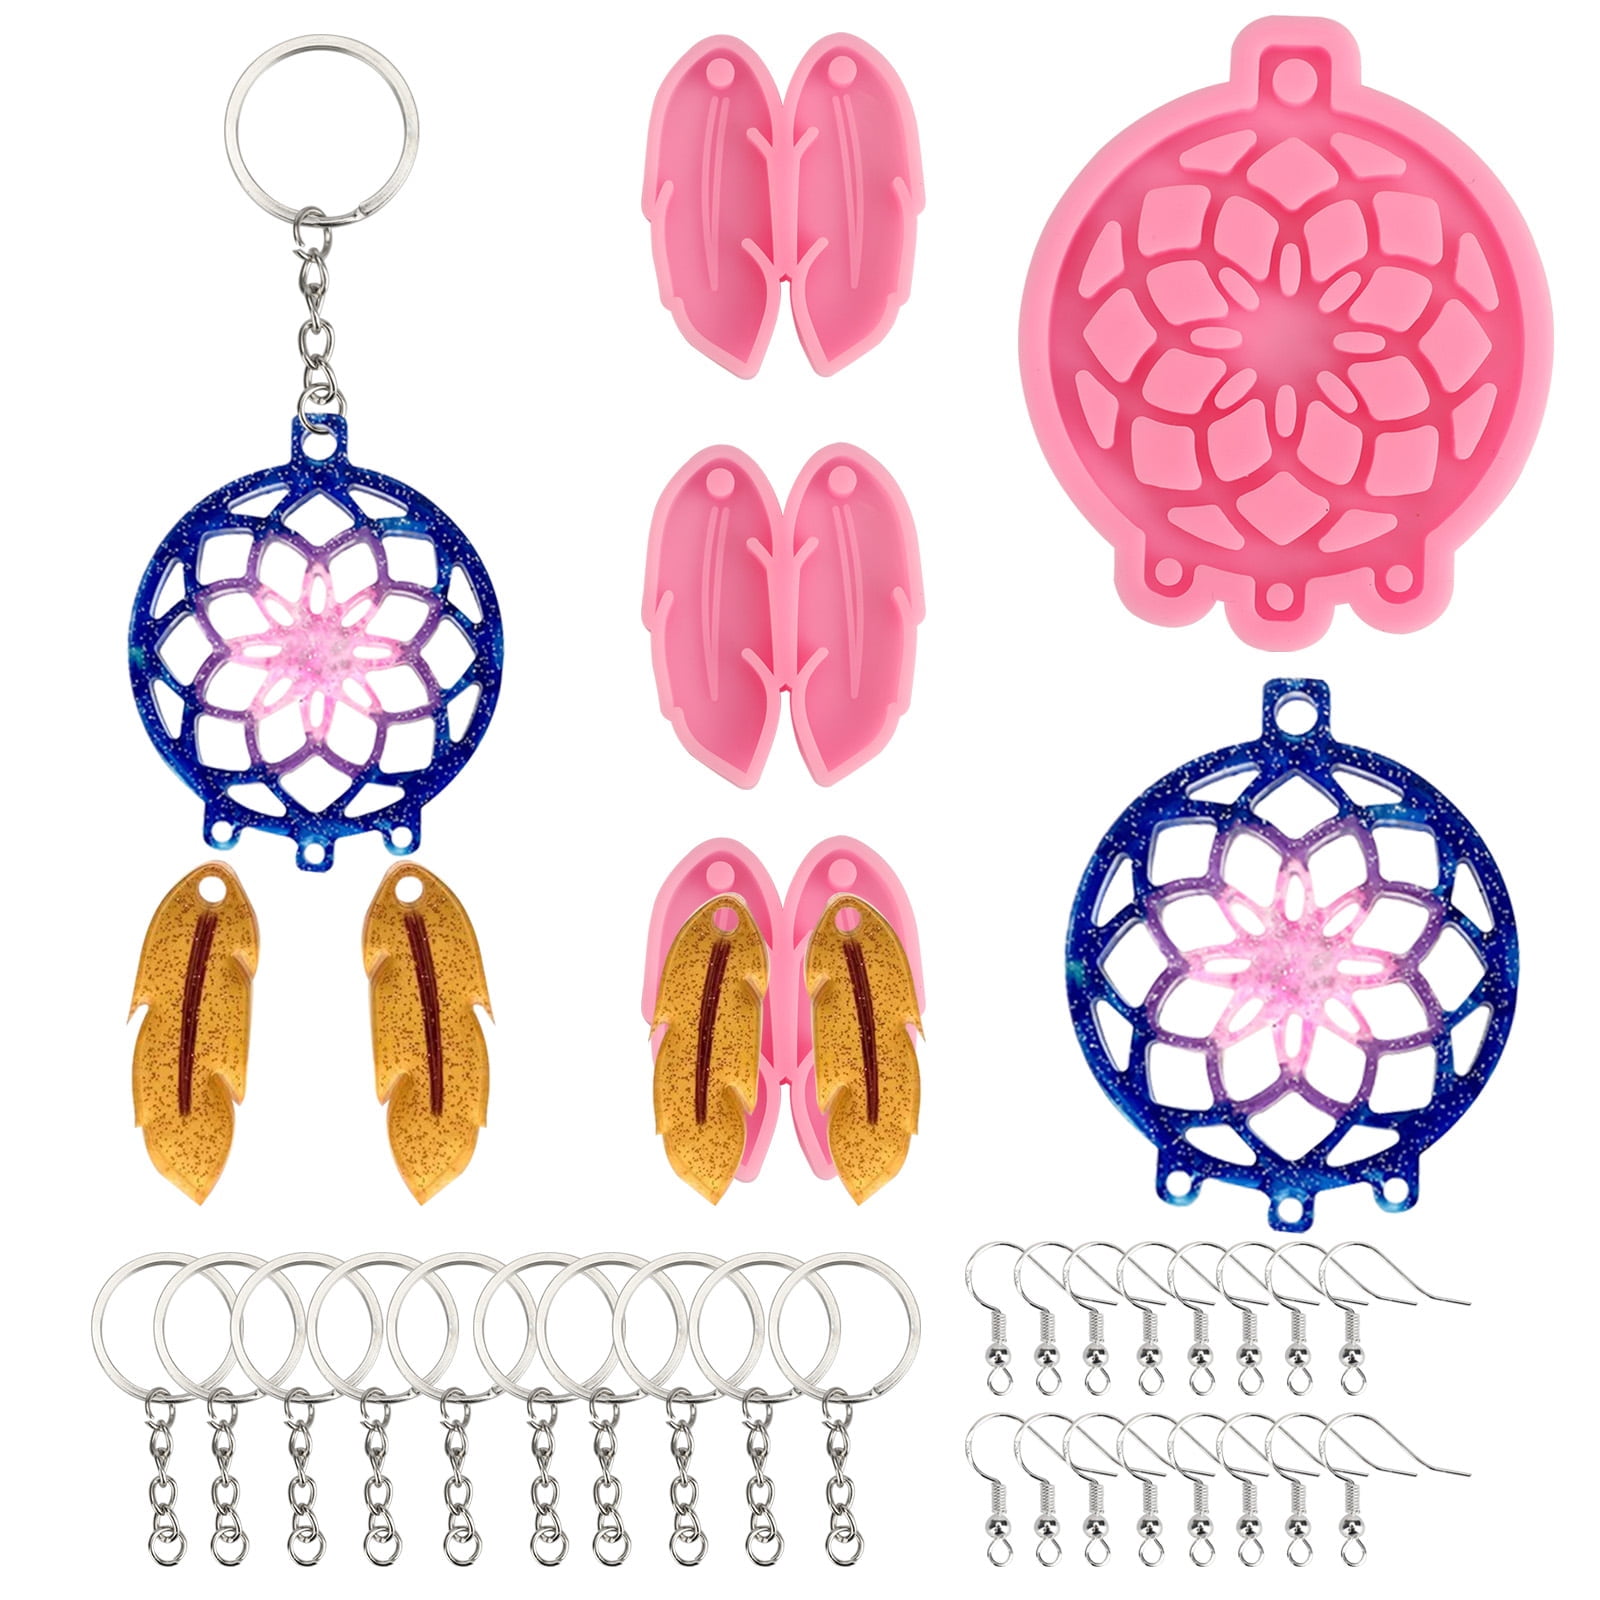 Tassel Knot Keychain Molds Silicone Resin Art Mold Jewelry Making Supplies  1pc S